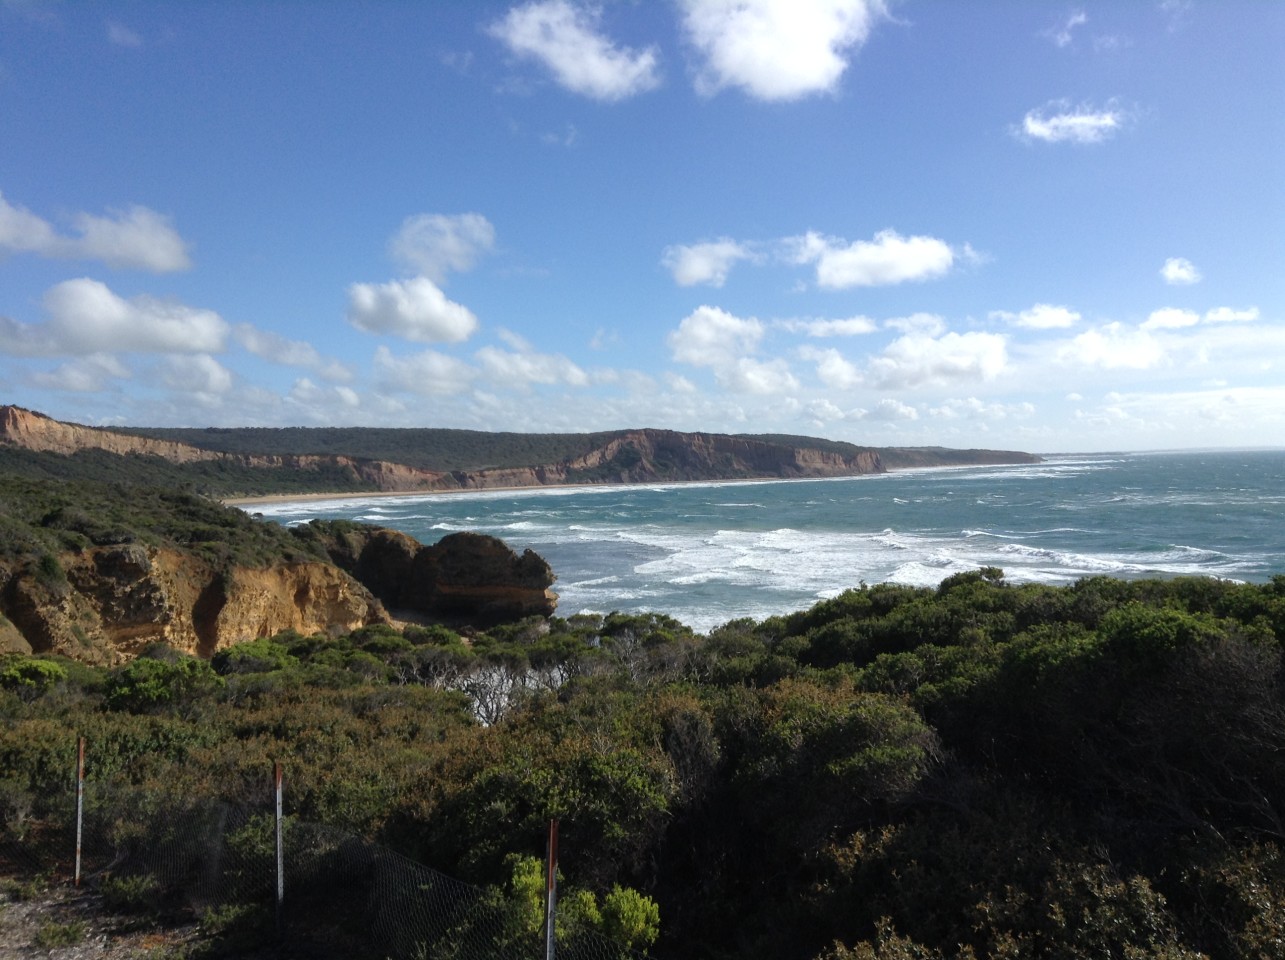 The first stop along The Great Ocean Road in Melbourne